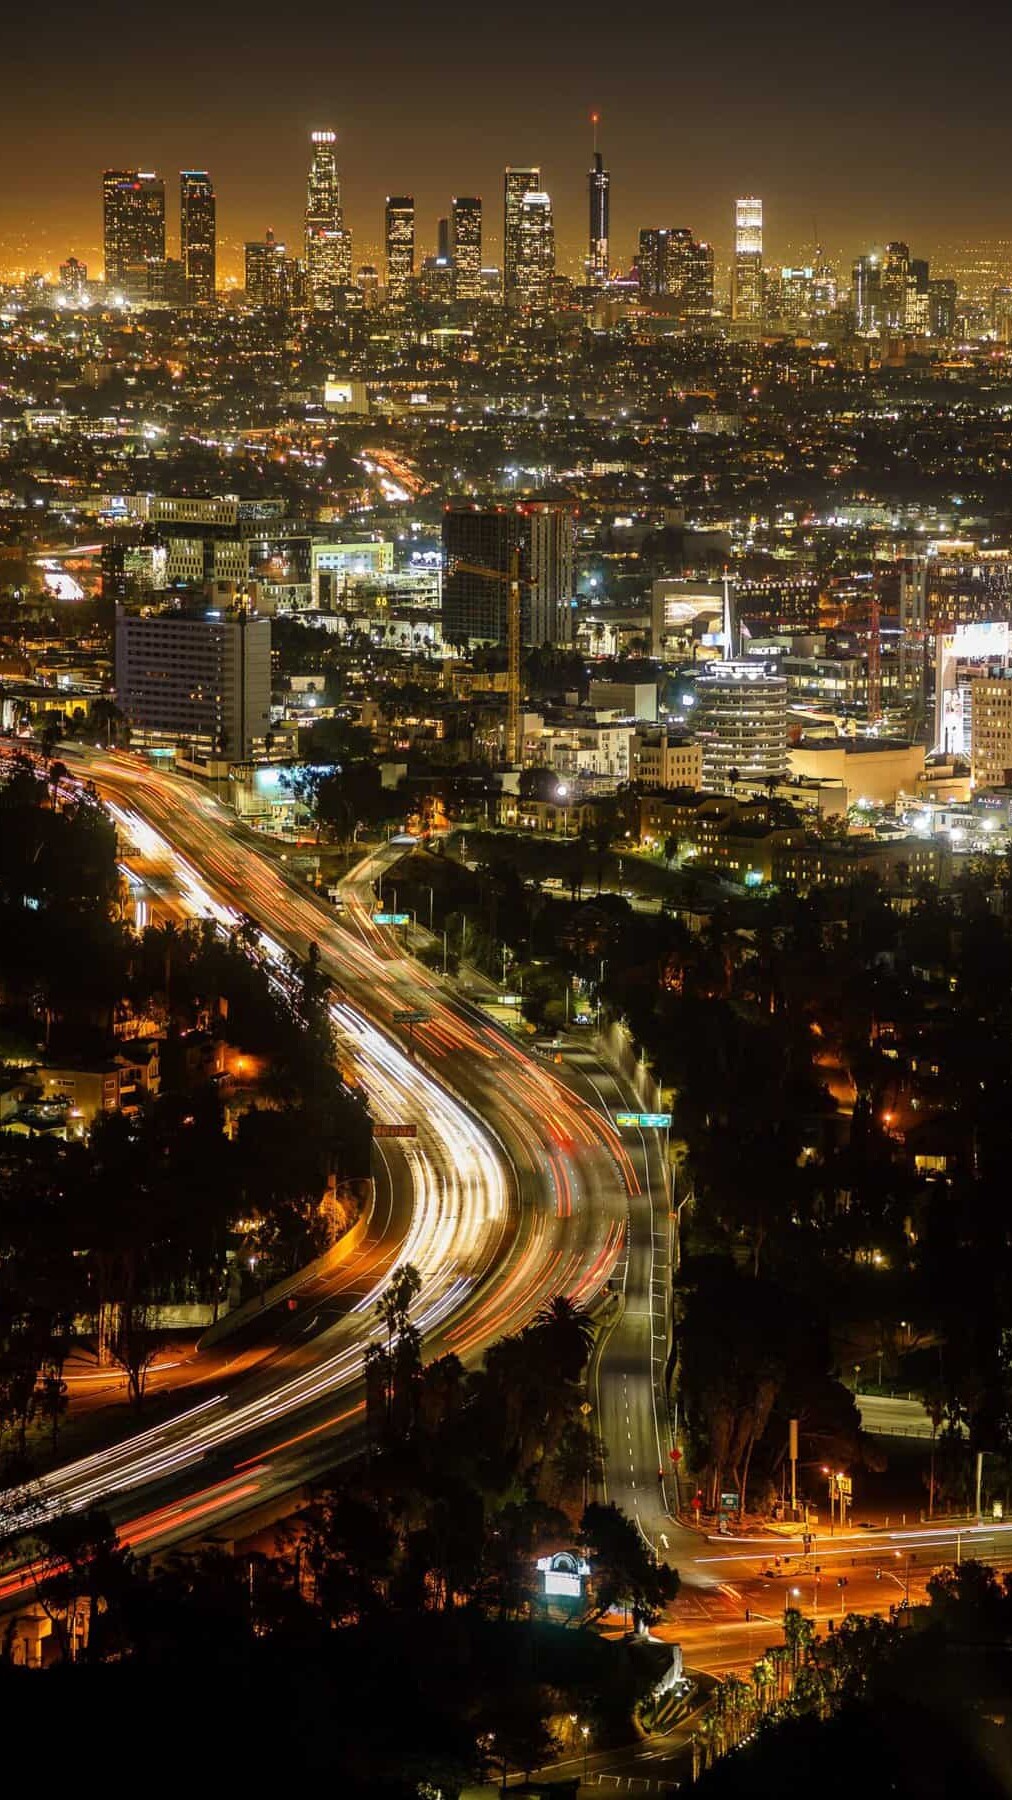 An overhead shot depicting the nightlife found in Los Angeles.